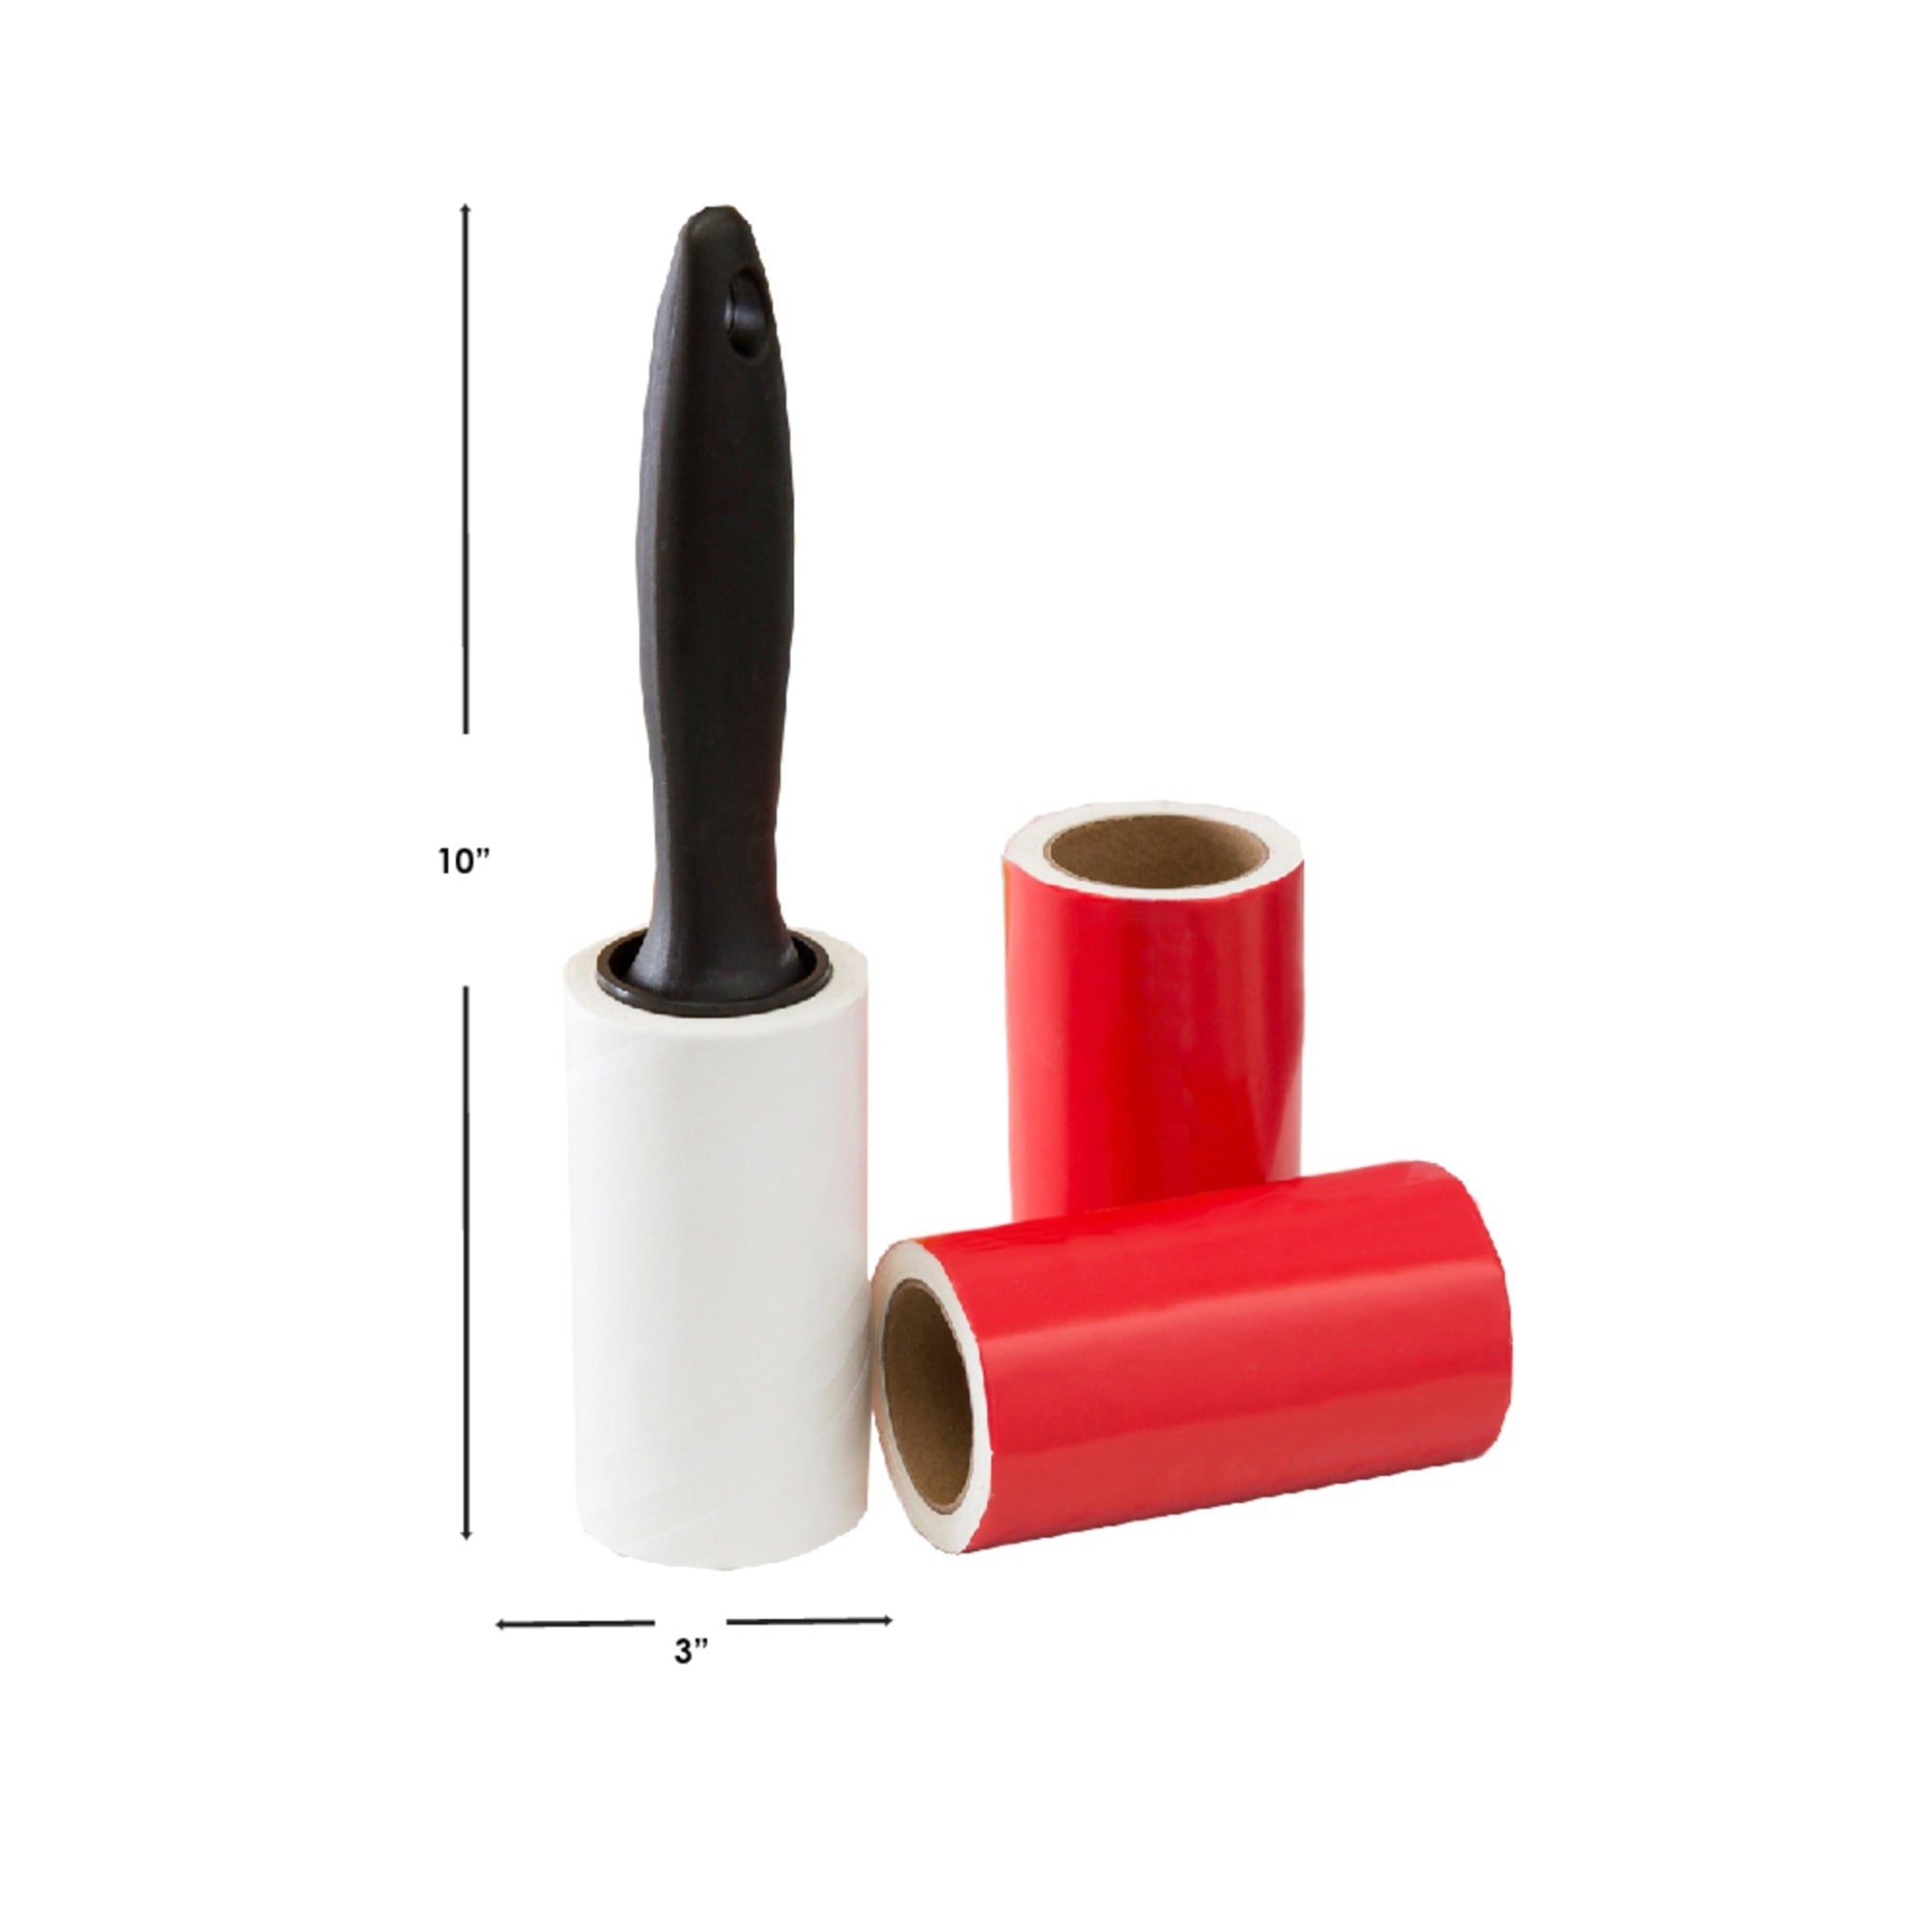 Home Basics 100 Sheet Lint Roller with 2 Refillable Rolls, Black, IRONING